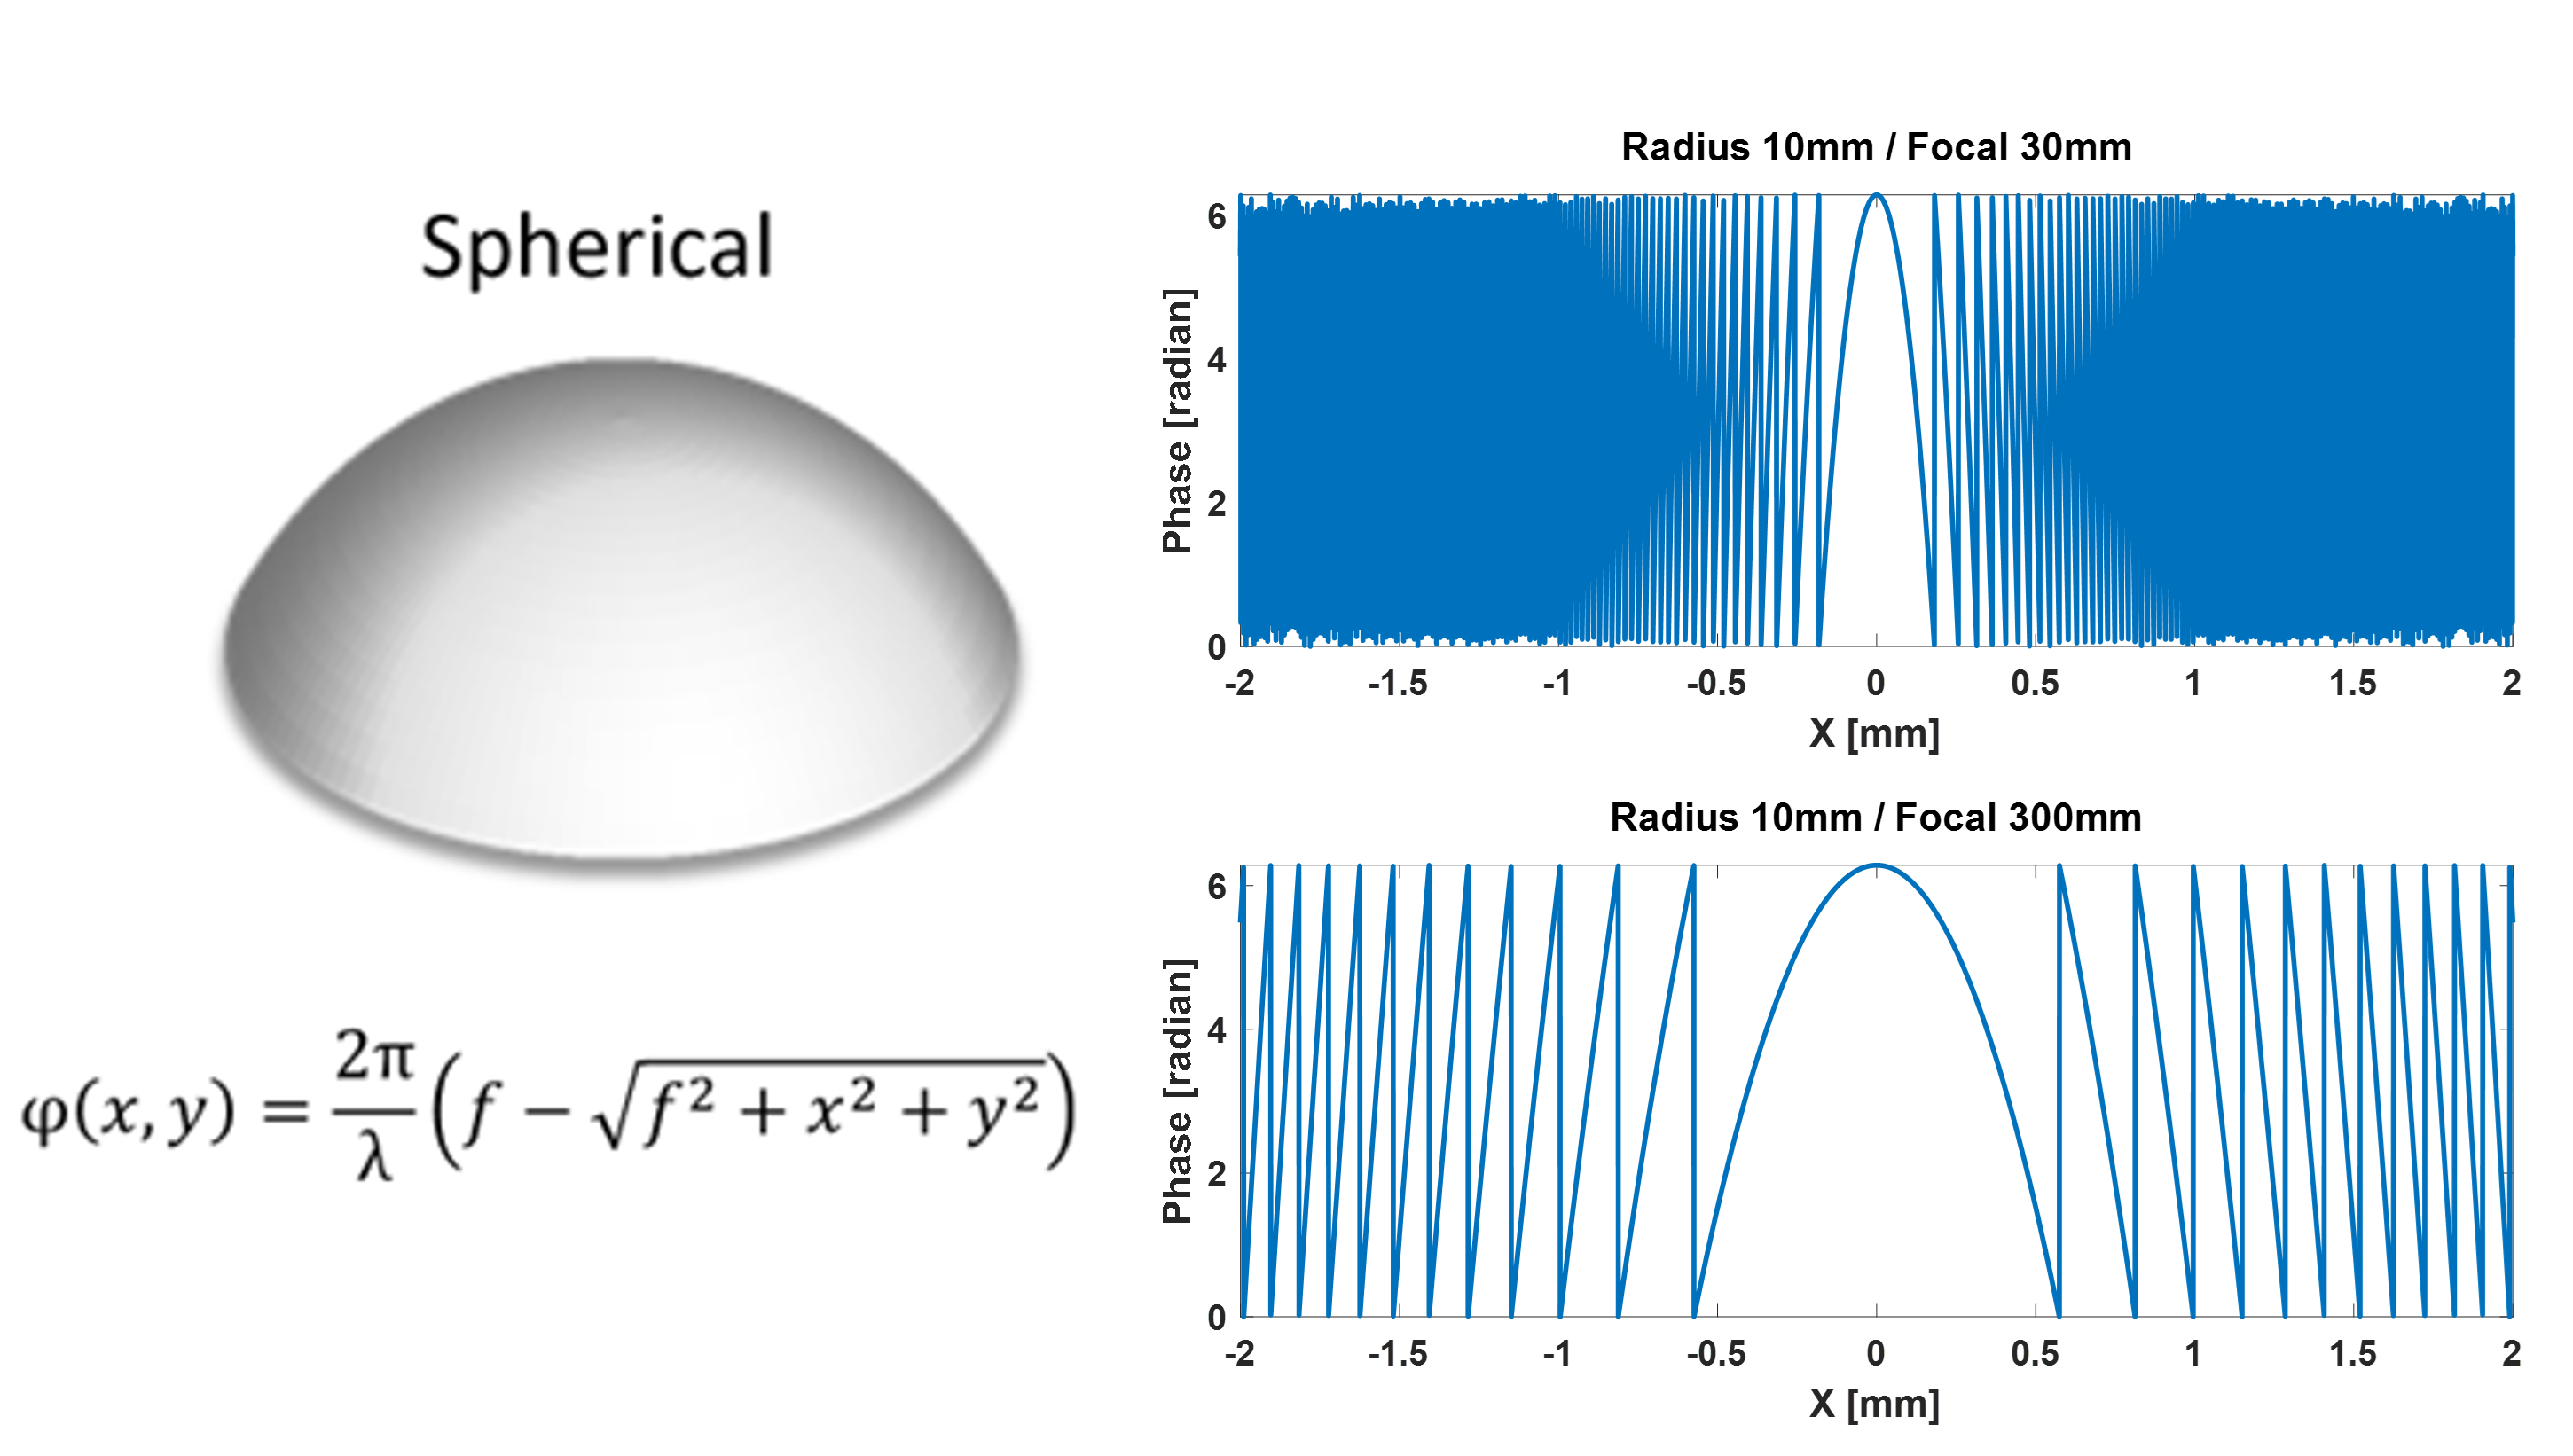 Figure_phase_profile_spherical_Nmat.png